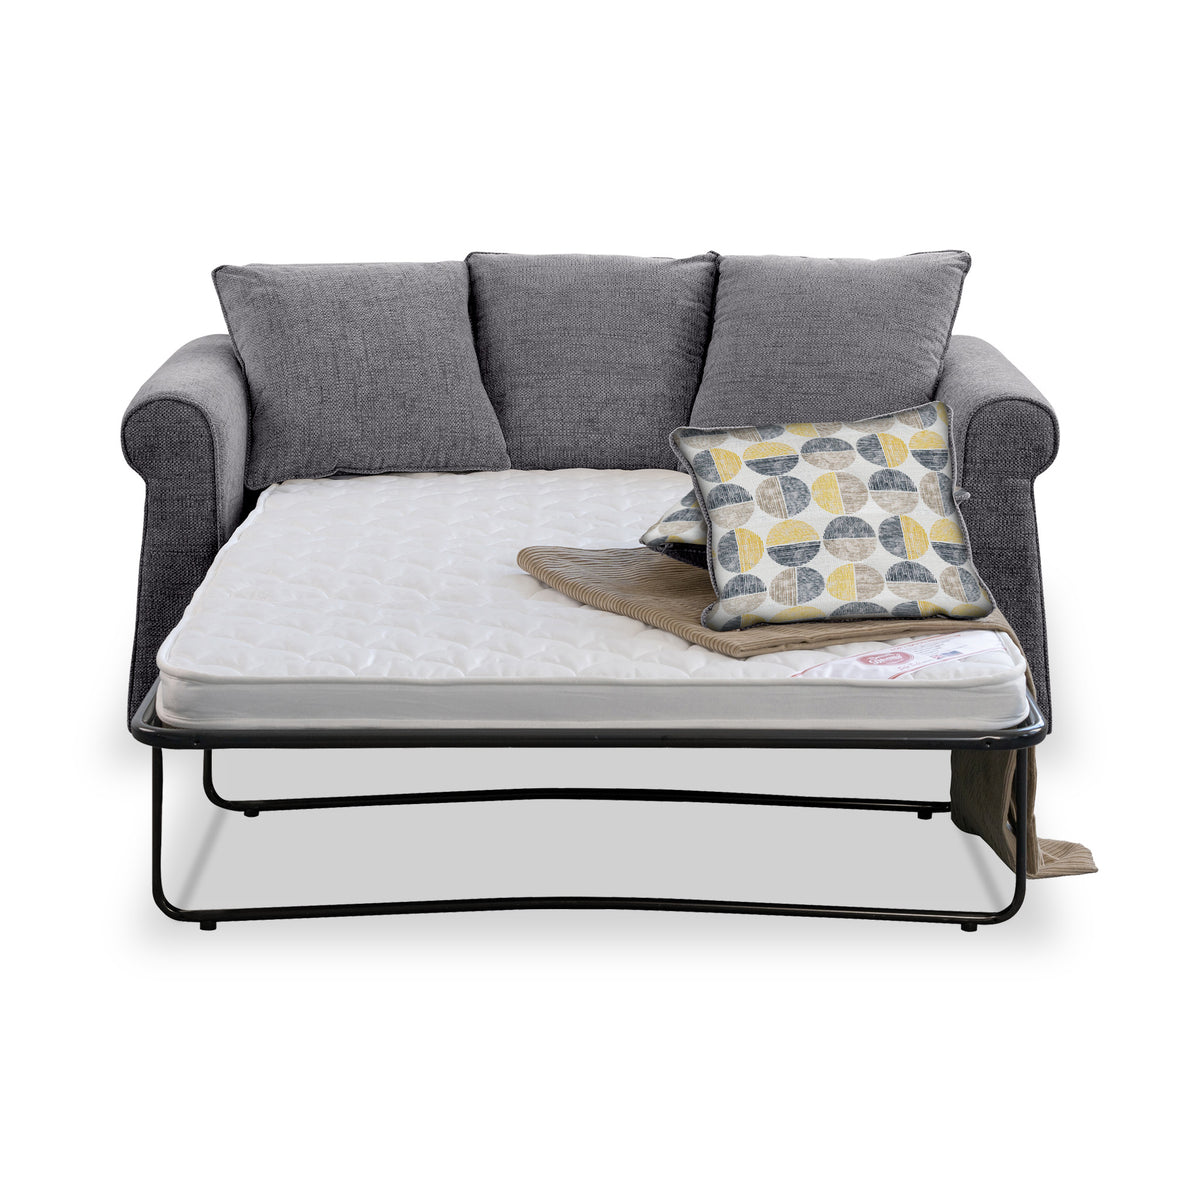 Branston Charcoal Soft Weave 2 Seater Sofabed with Beige Scatter Cushions from Roseland Furniture